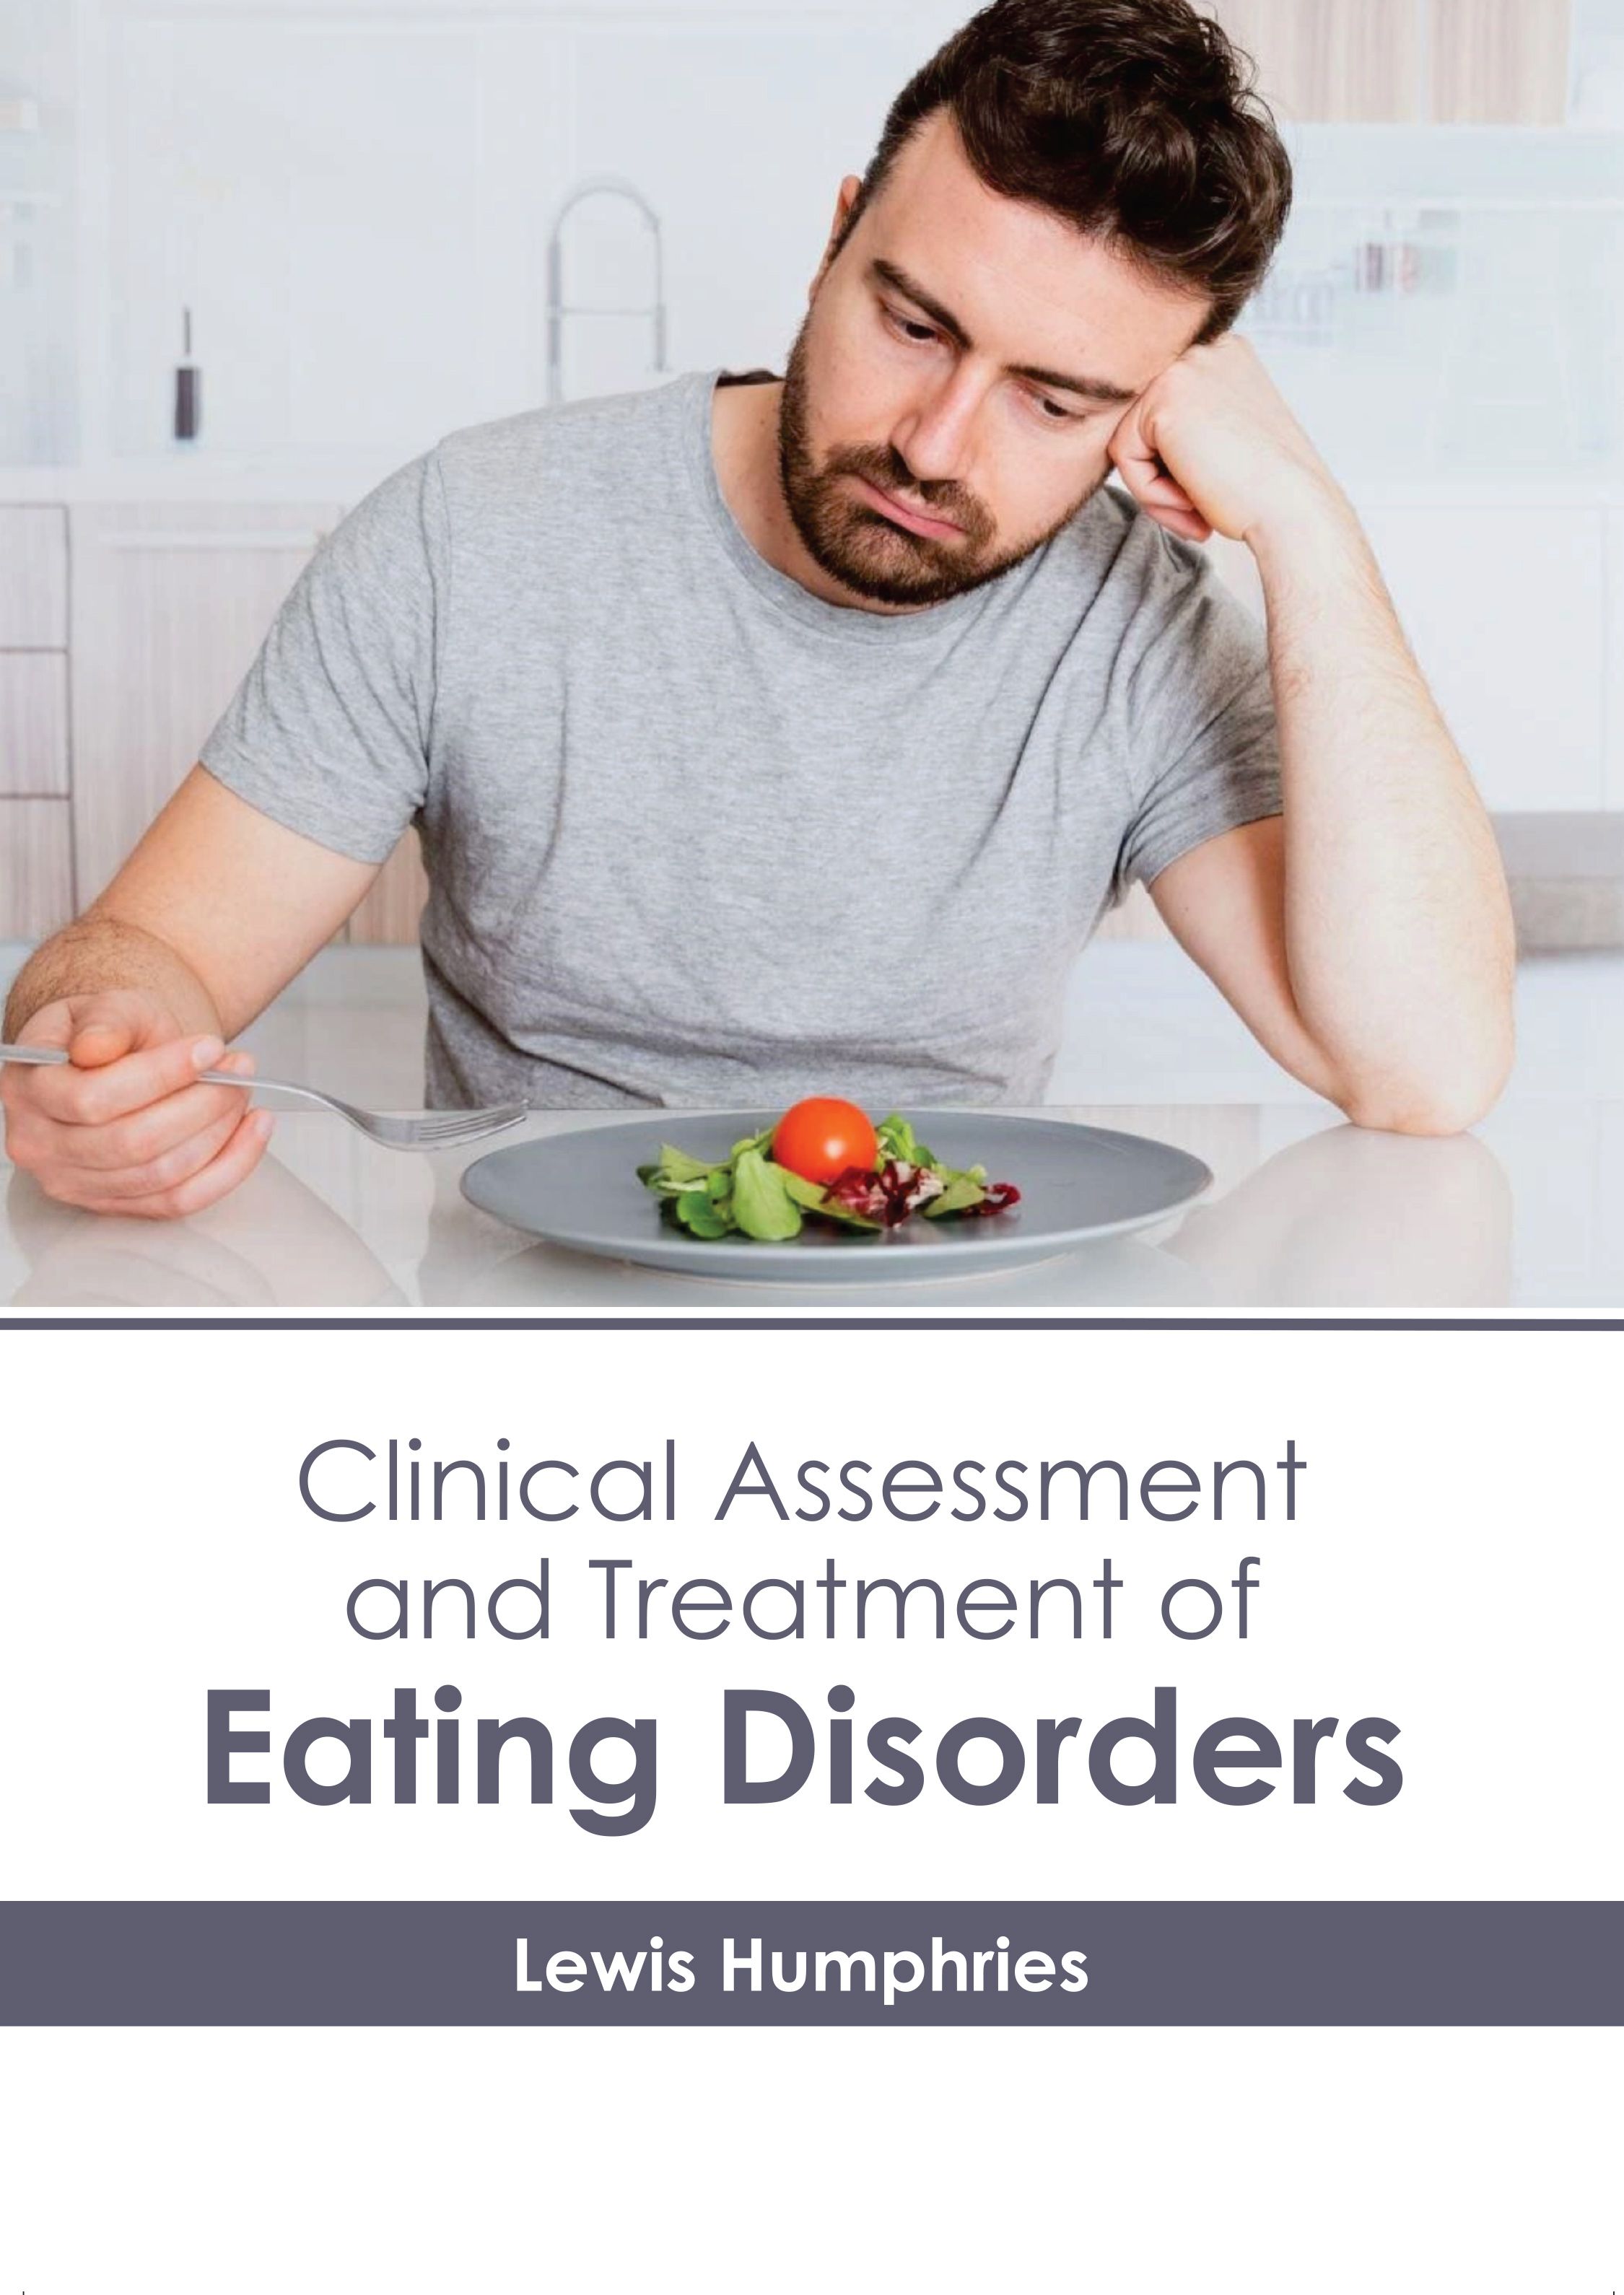 CLINICAL ASSESSMENT AND TREATMENT OF EATING DISORDERS